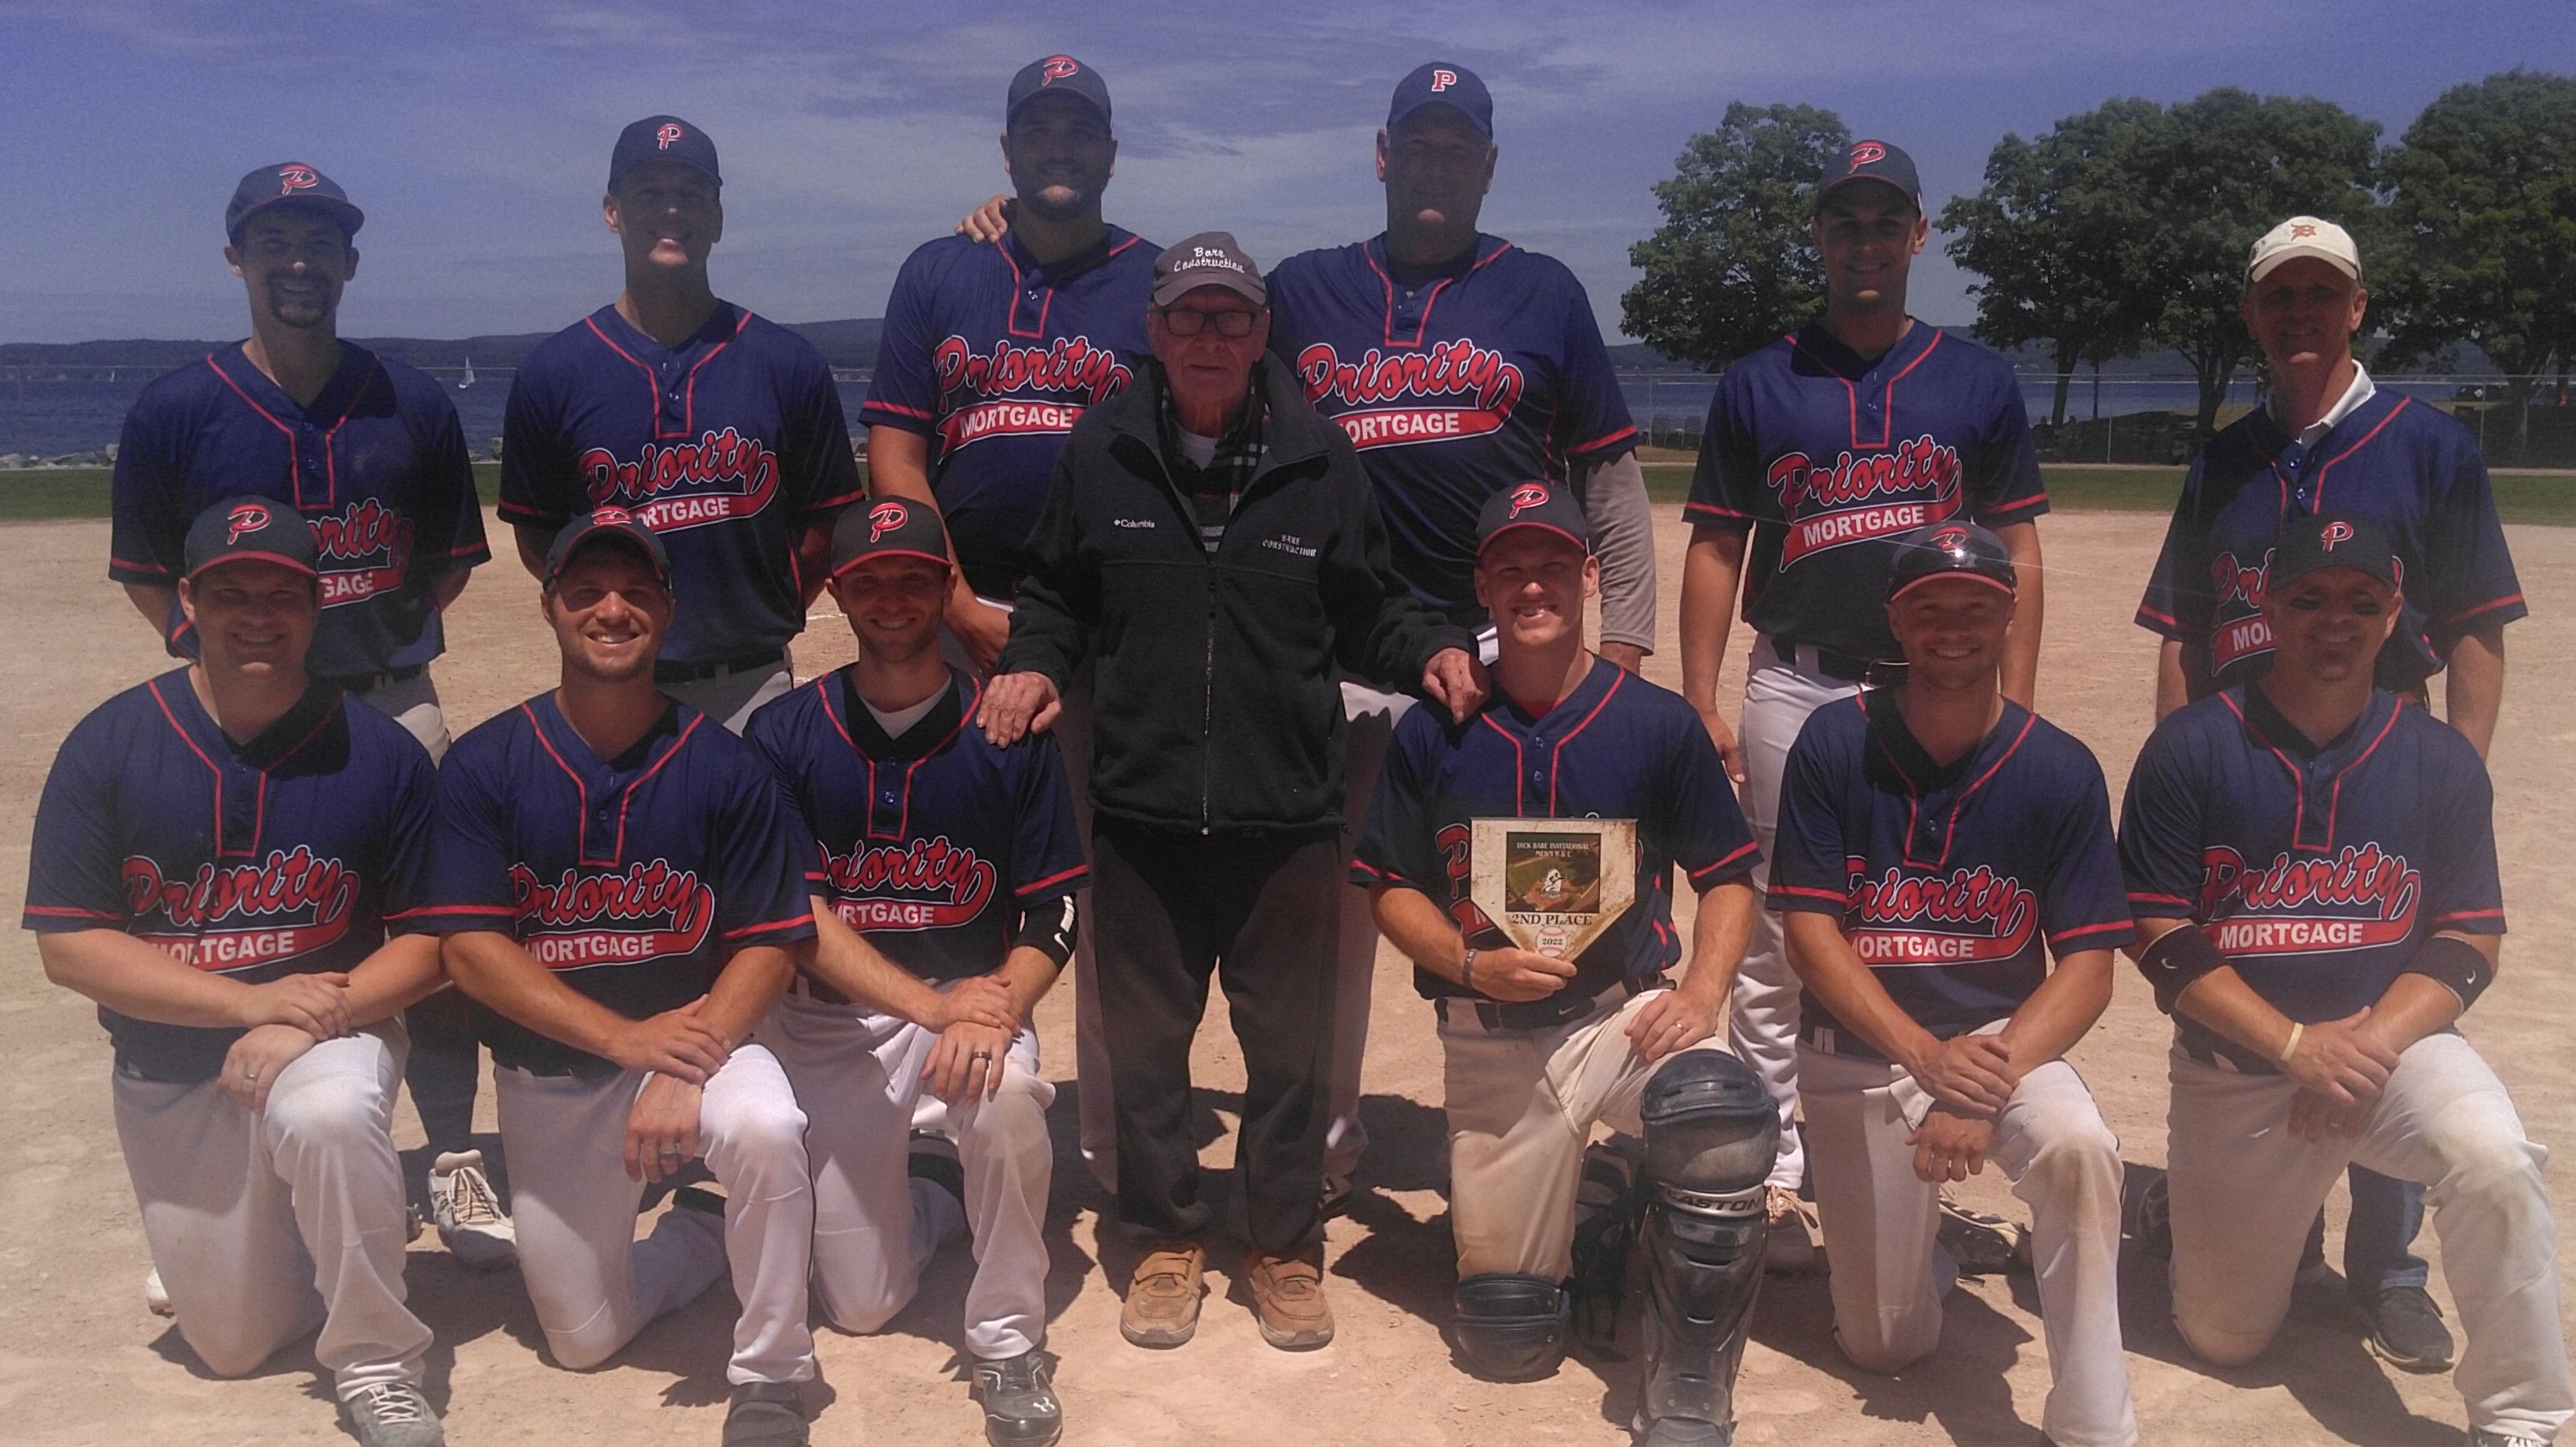 2022 Dick Bare Invitational Runner-Up - Priority Mortgage from Grand Rapids